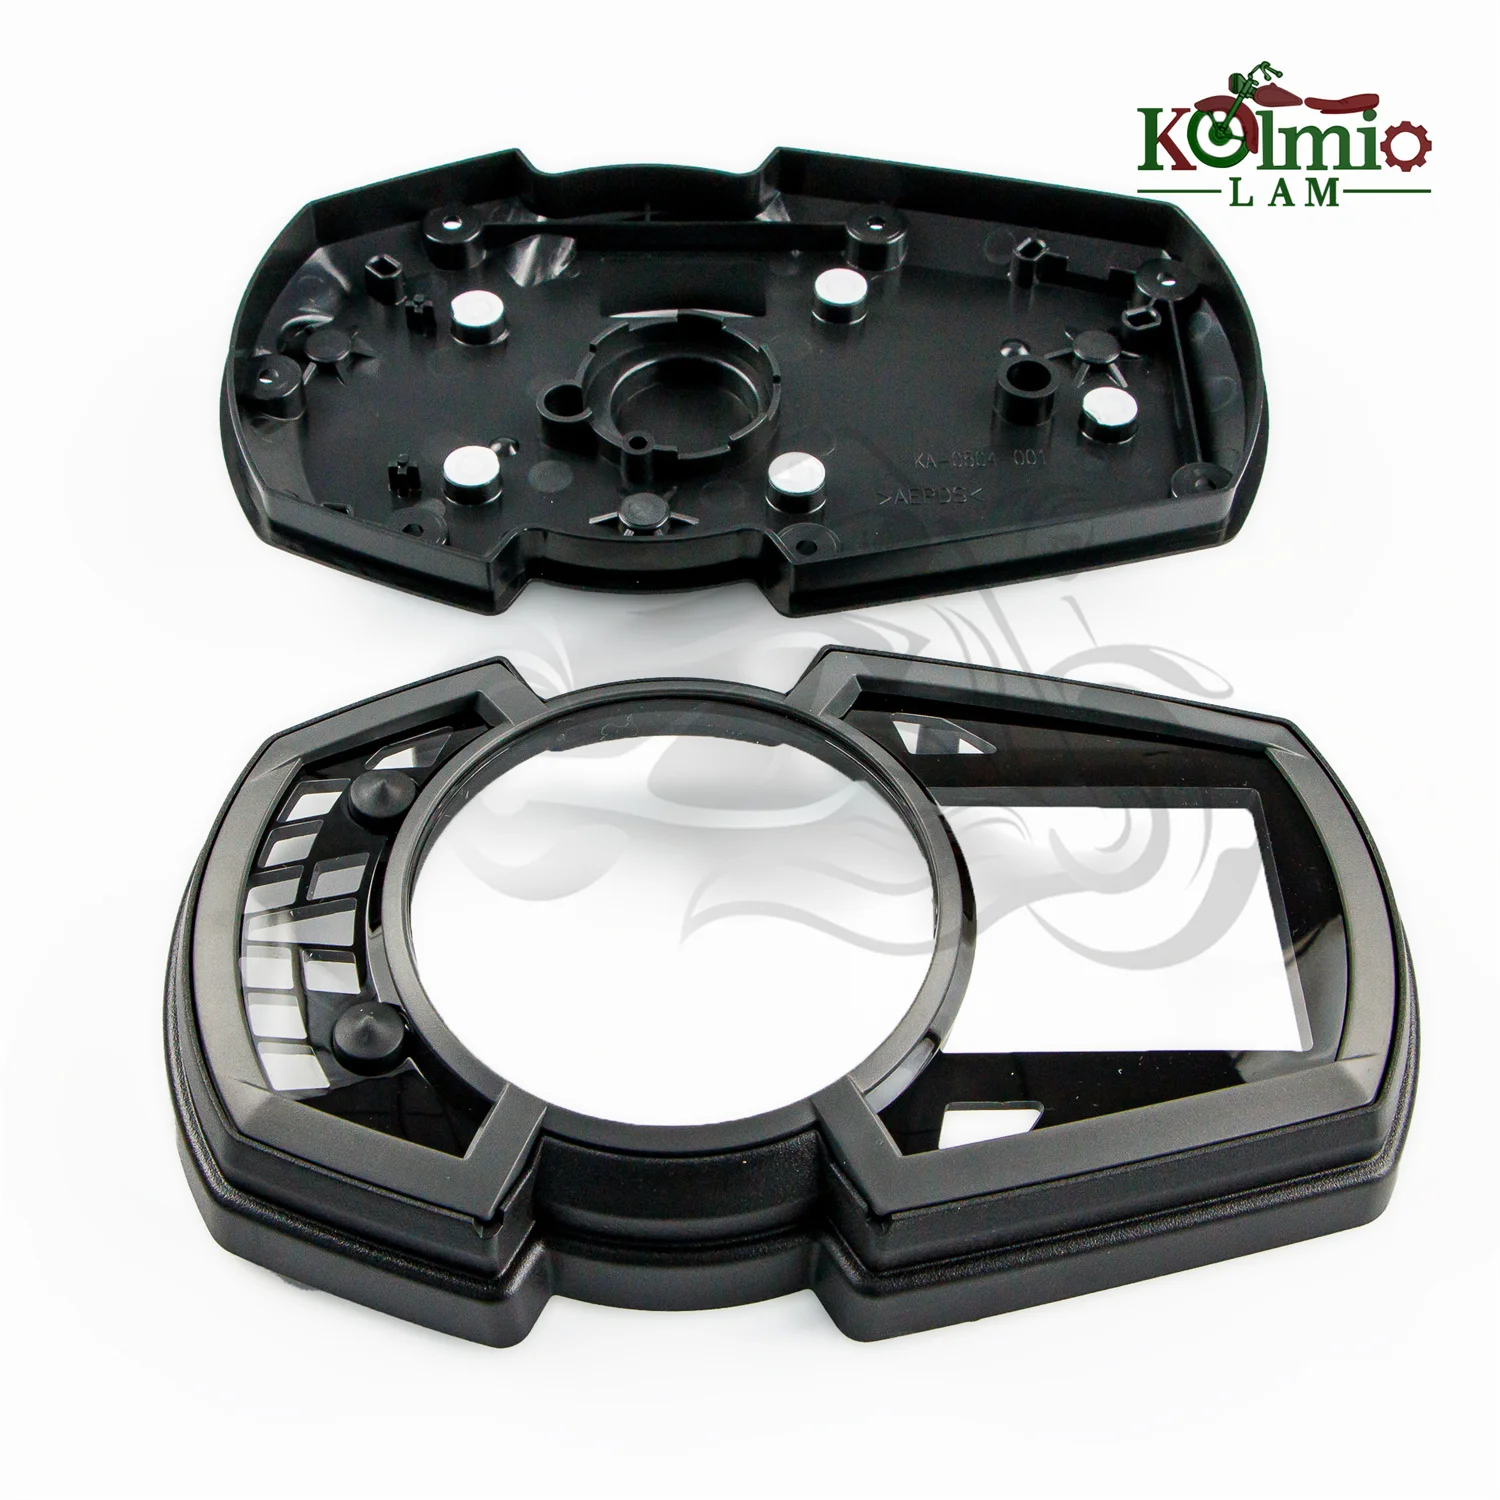 Motorcycle Speedometer Instrument Shell Meter Case Gauge Cover Fit For K... - $78.47